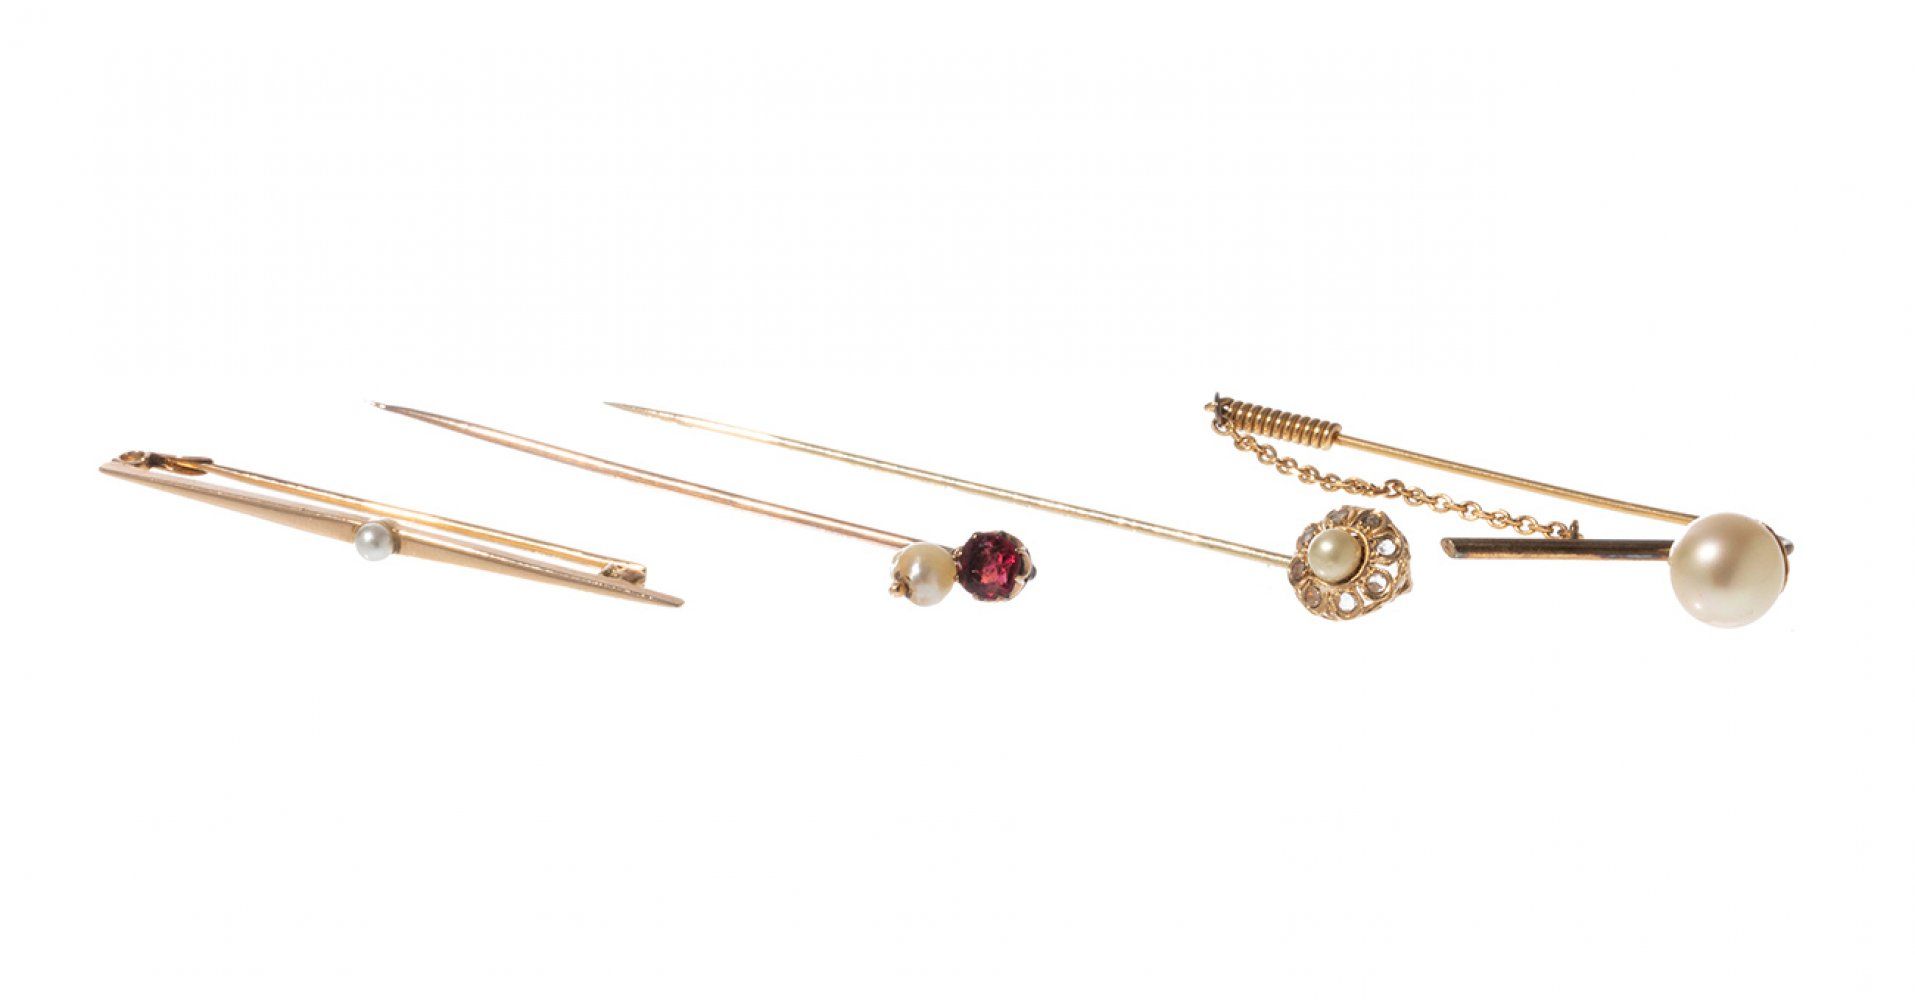 Null Set of four 18kt yellow gold tie pins with pearls.
Weight: 7.8 g.